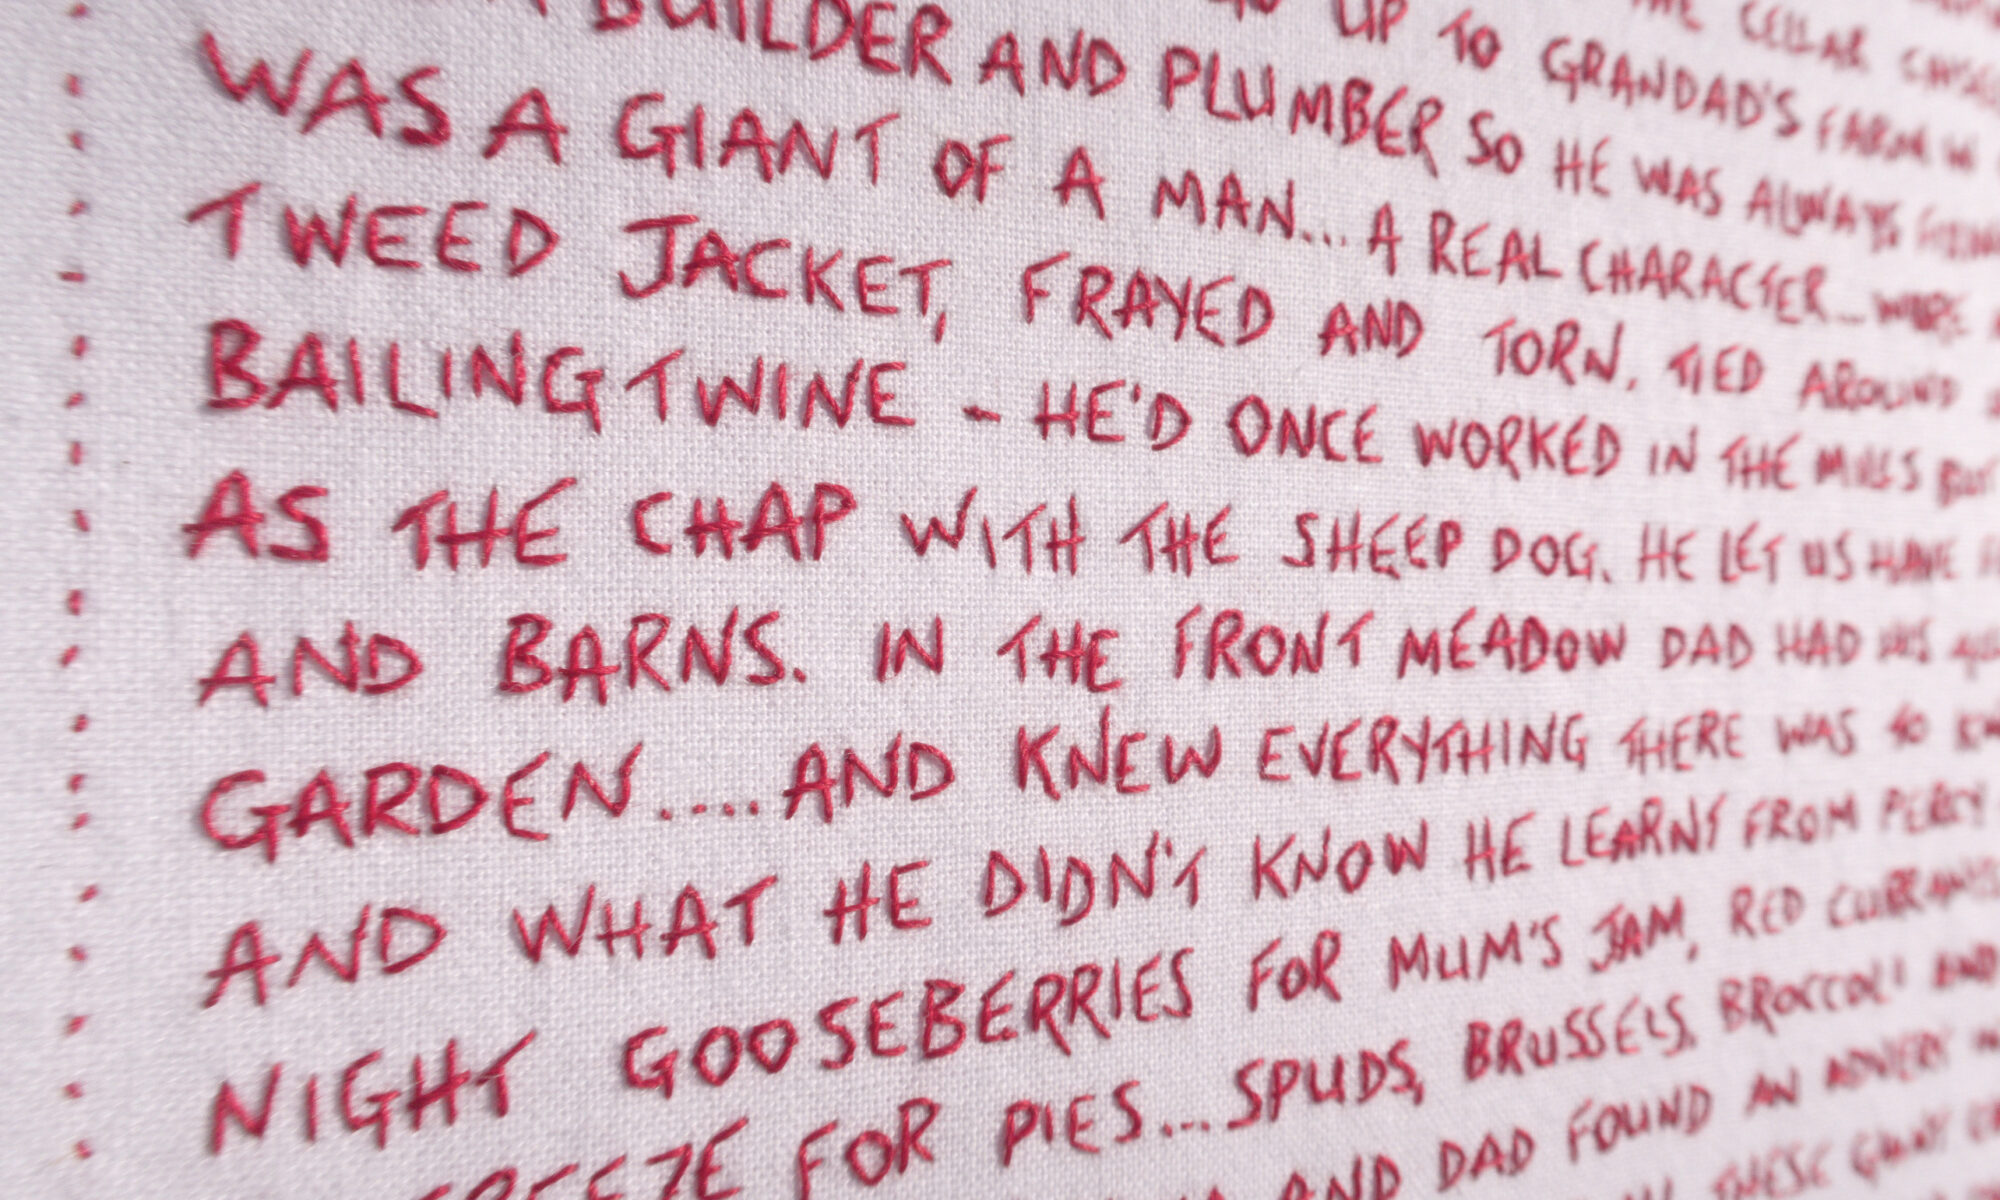 Close up of the stitching - Giant Cauliflower Harvest - embroidered word, red thread about my father and his allotment